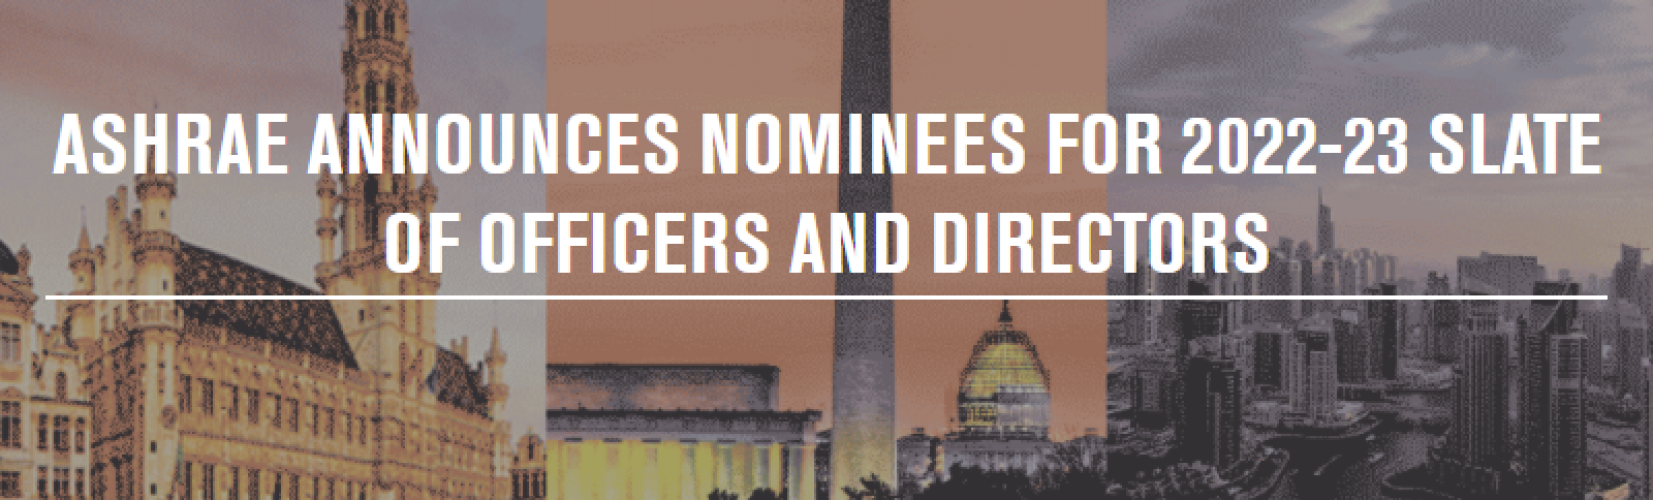 ASHRAE Announces Nominees for 2022-23 Slate of Officers and Directors